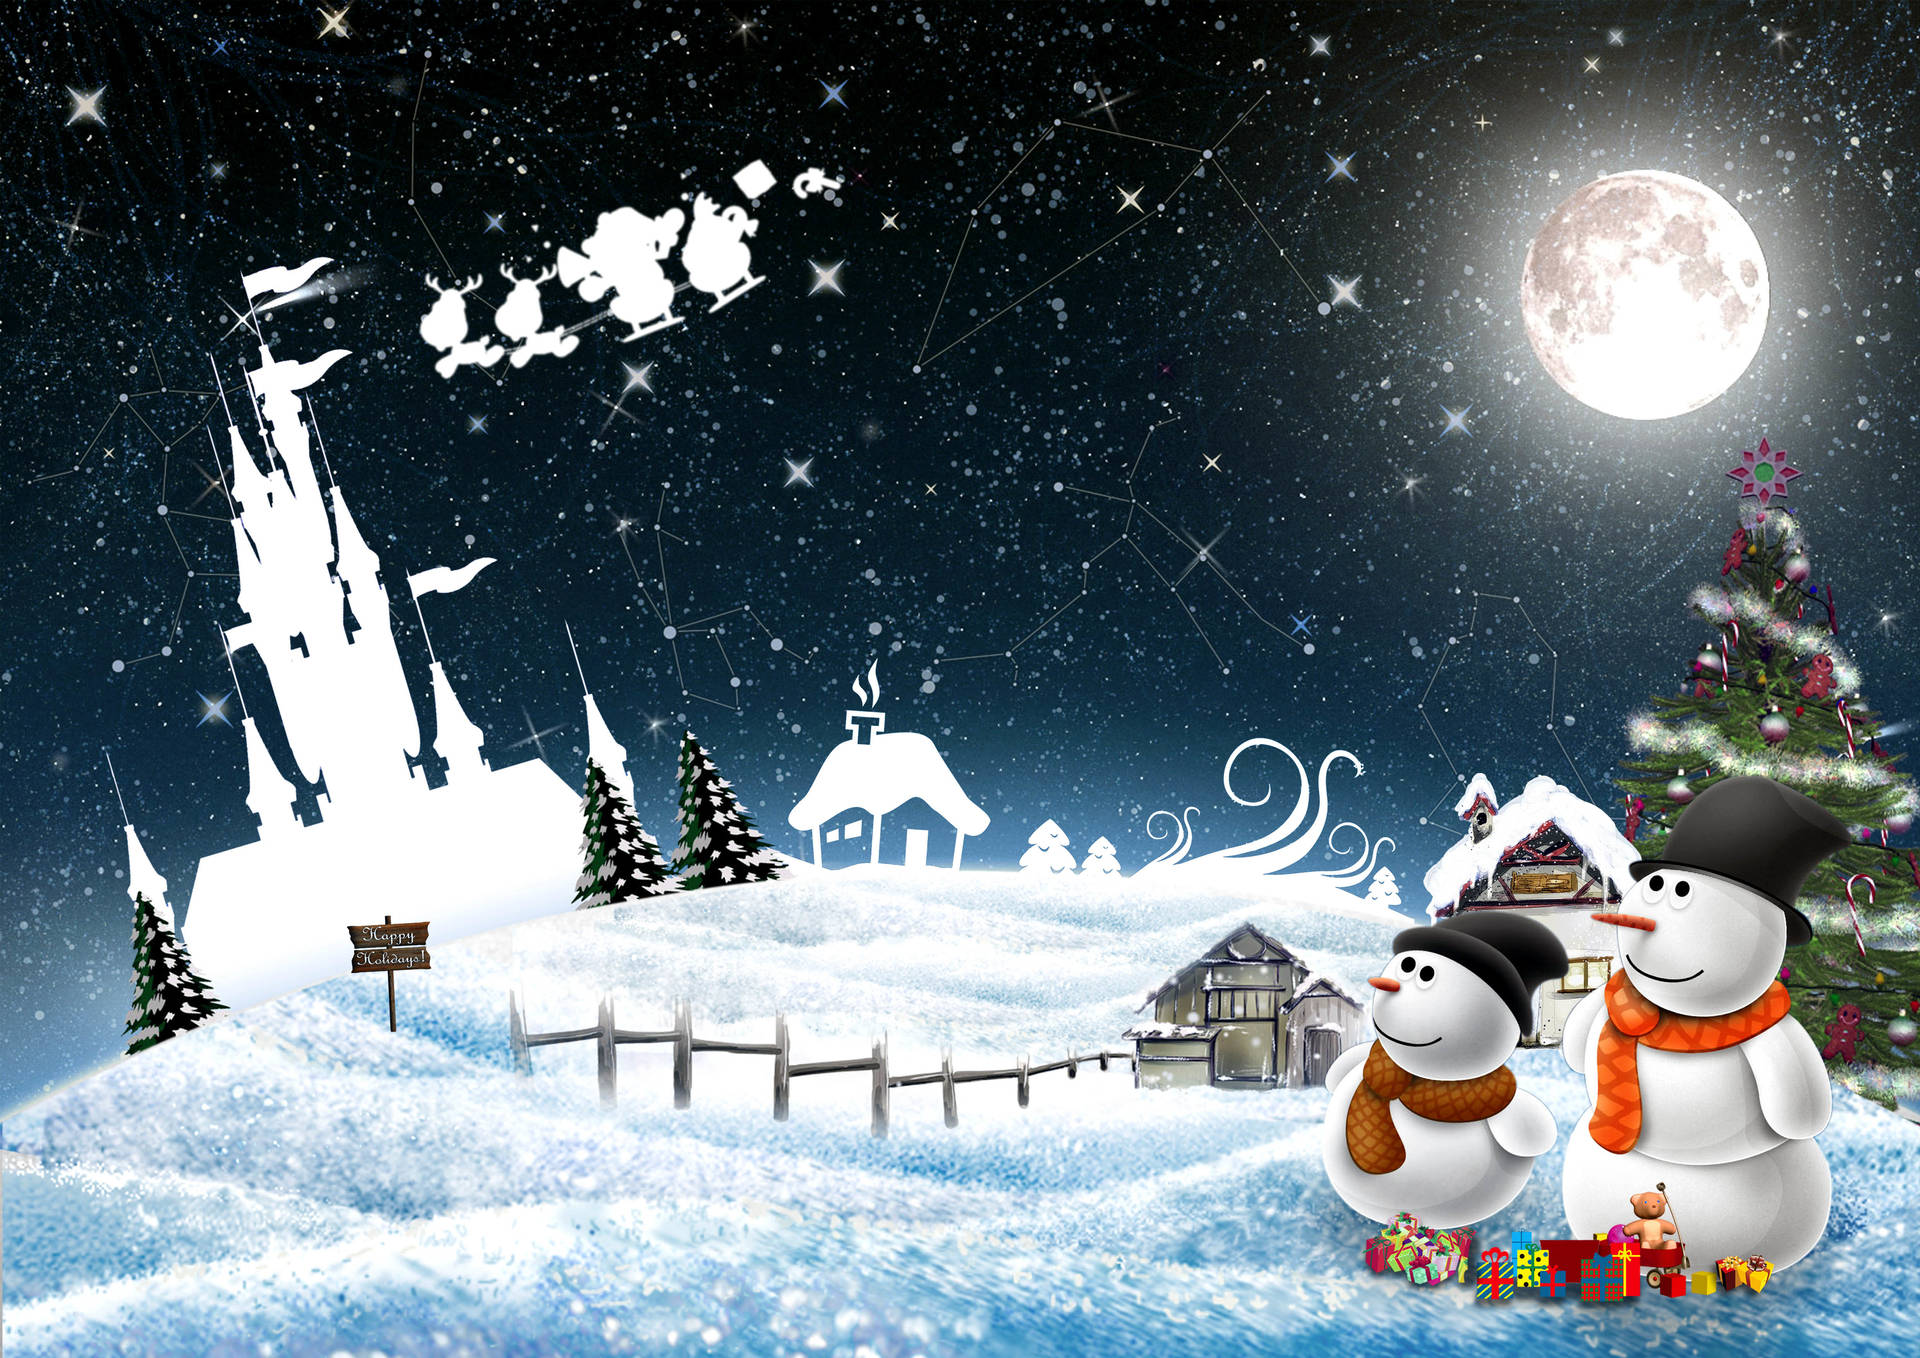 Welcome in the New Year with this magical snowman castle! Wallpaper